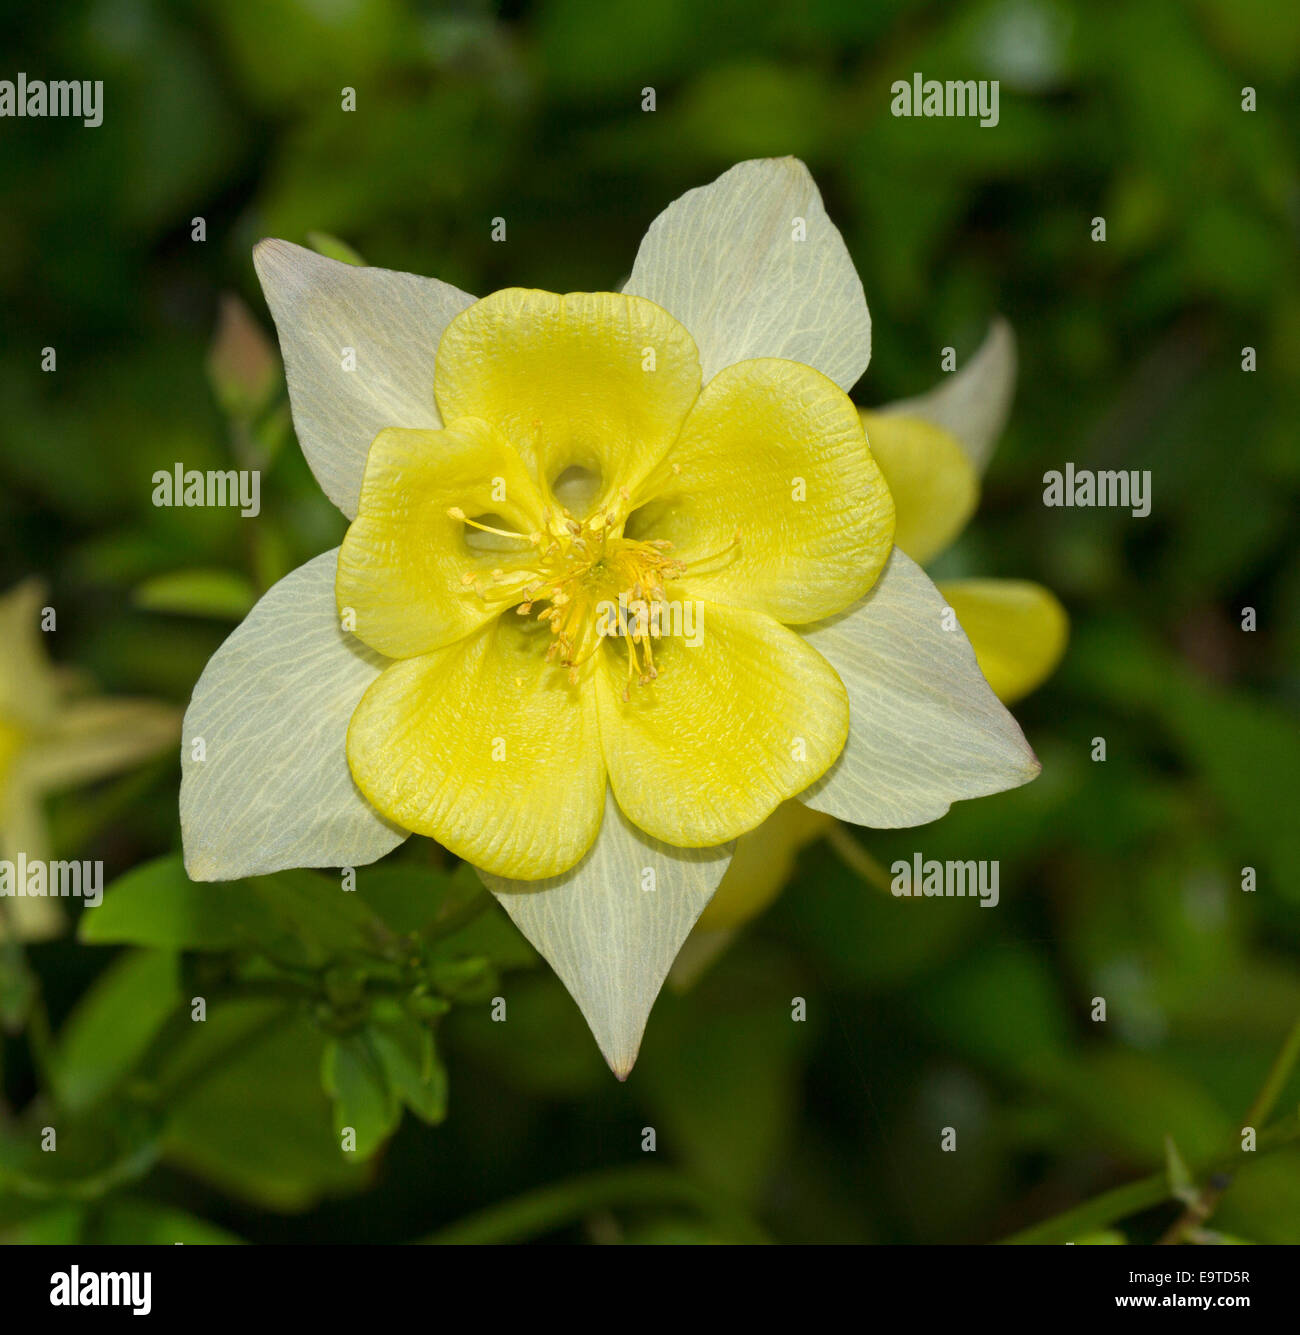 Spectacular Aquilegia / Columbine flower with lemon yellow outer petals & bright yellow inner ones against dark green background Stock Photo